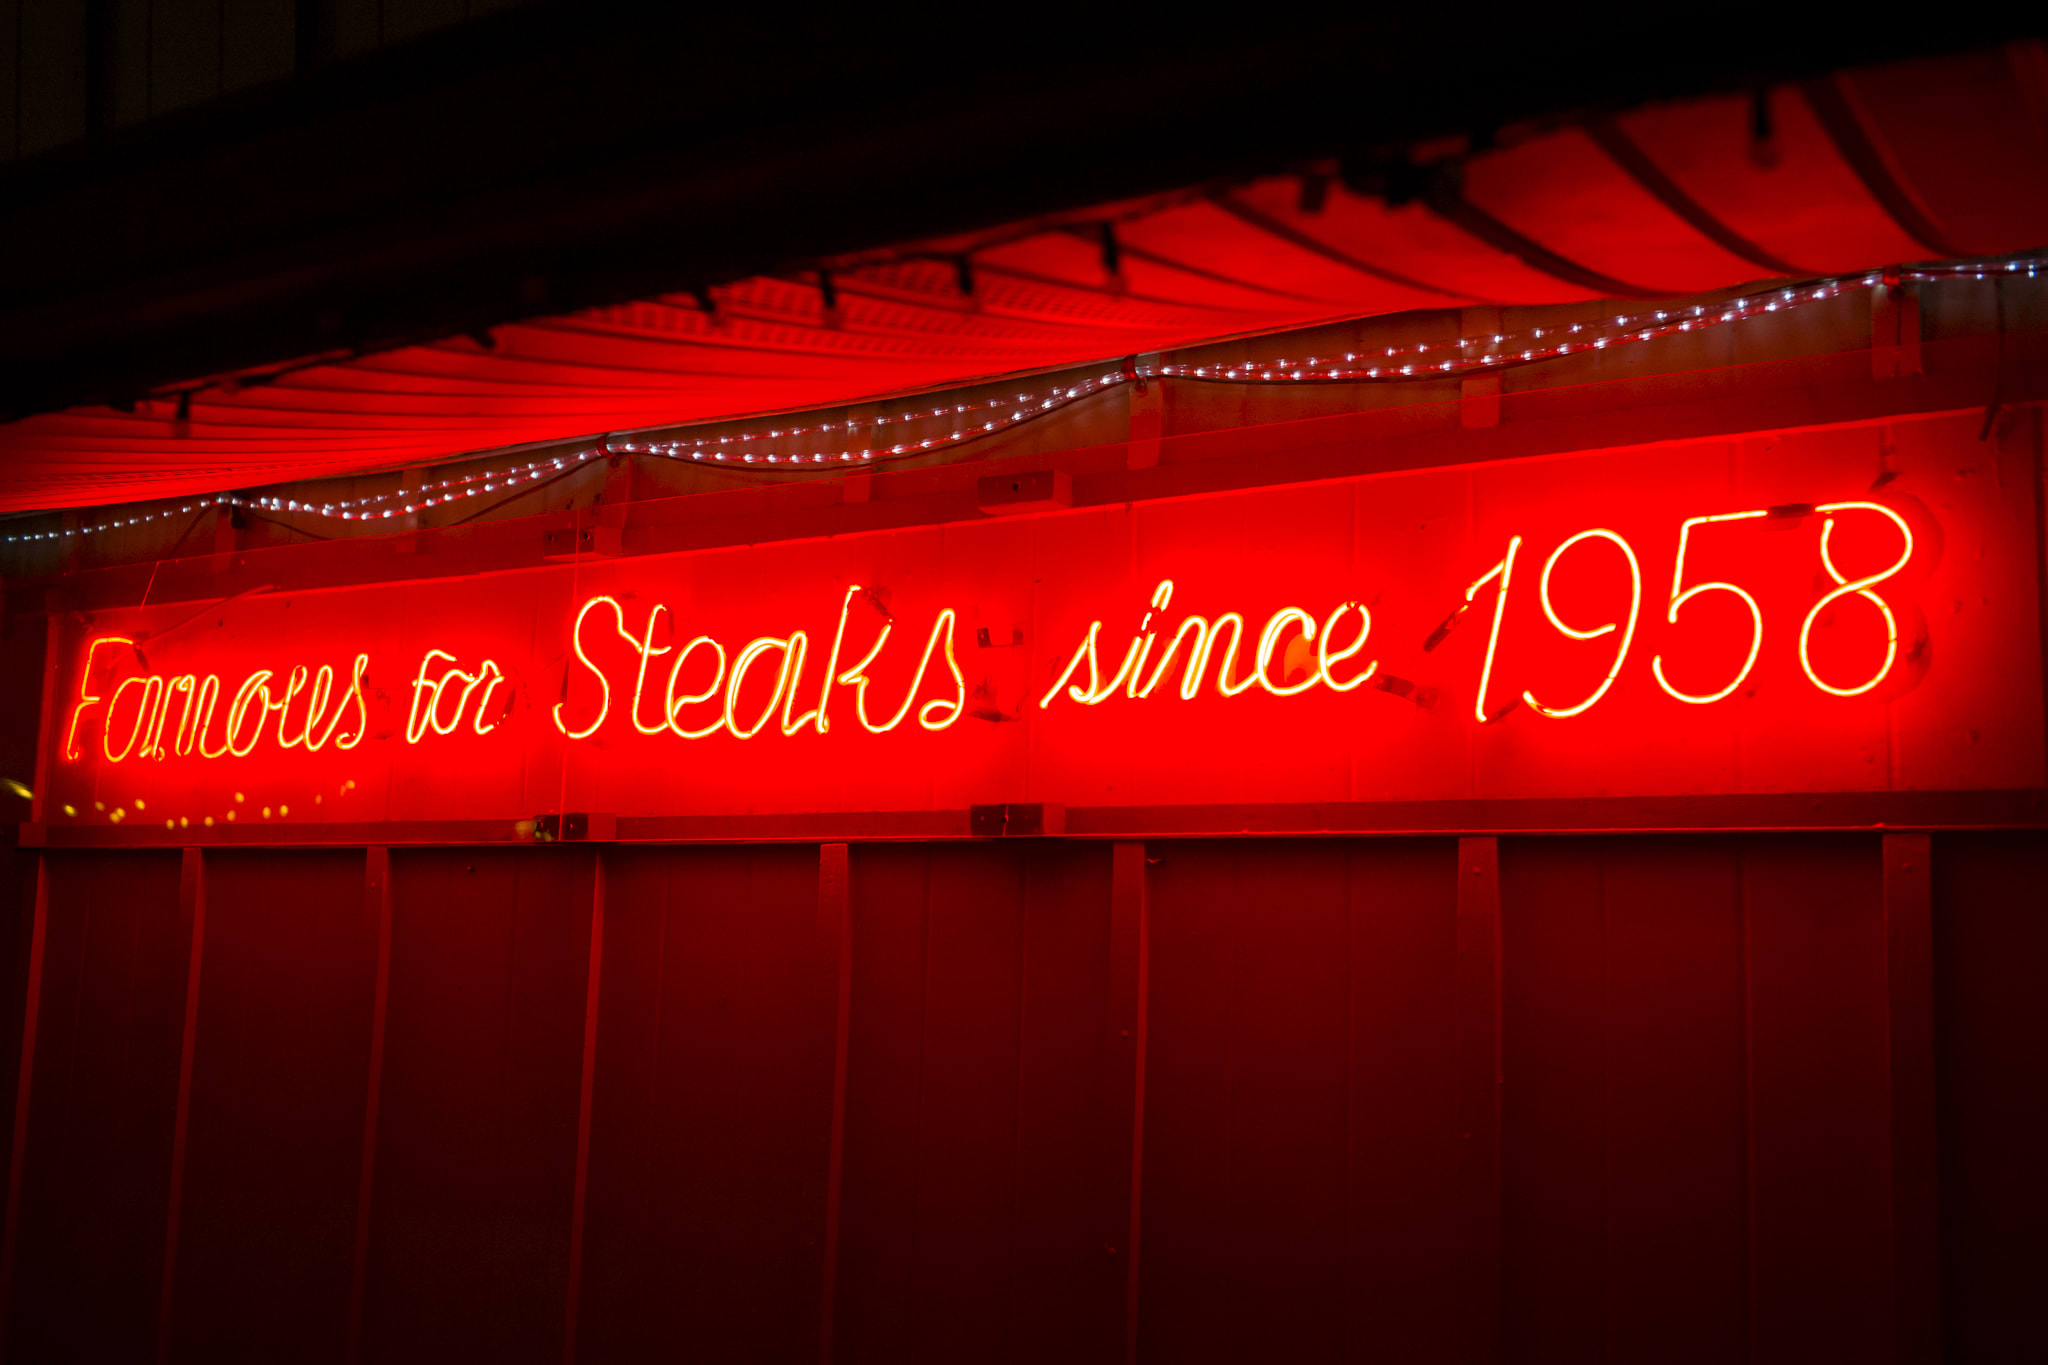 neon sign reads famous for steaks since 1958